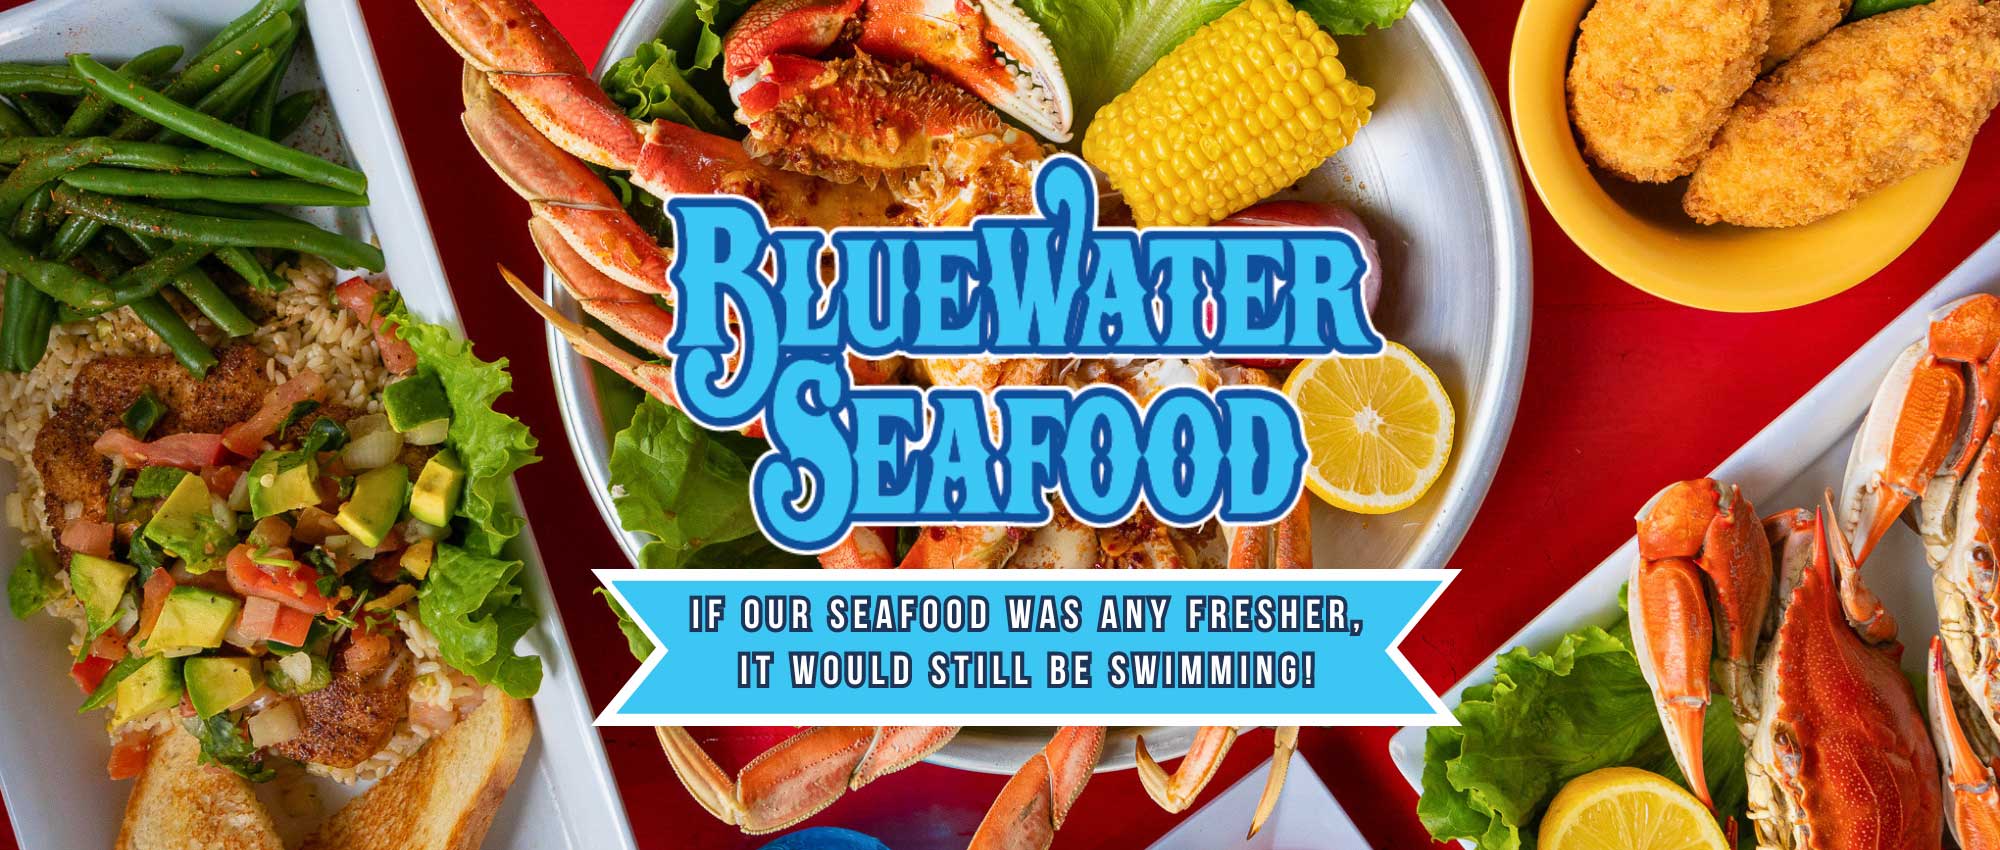 BlueWater Seafood Banner for homepage showing a selection of seafood dinners with the company logo